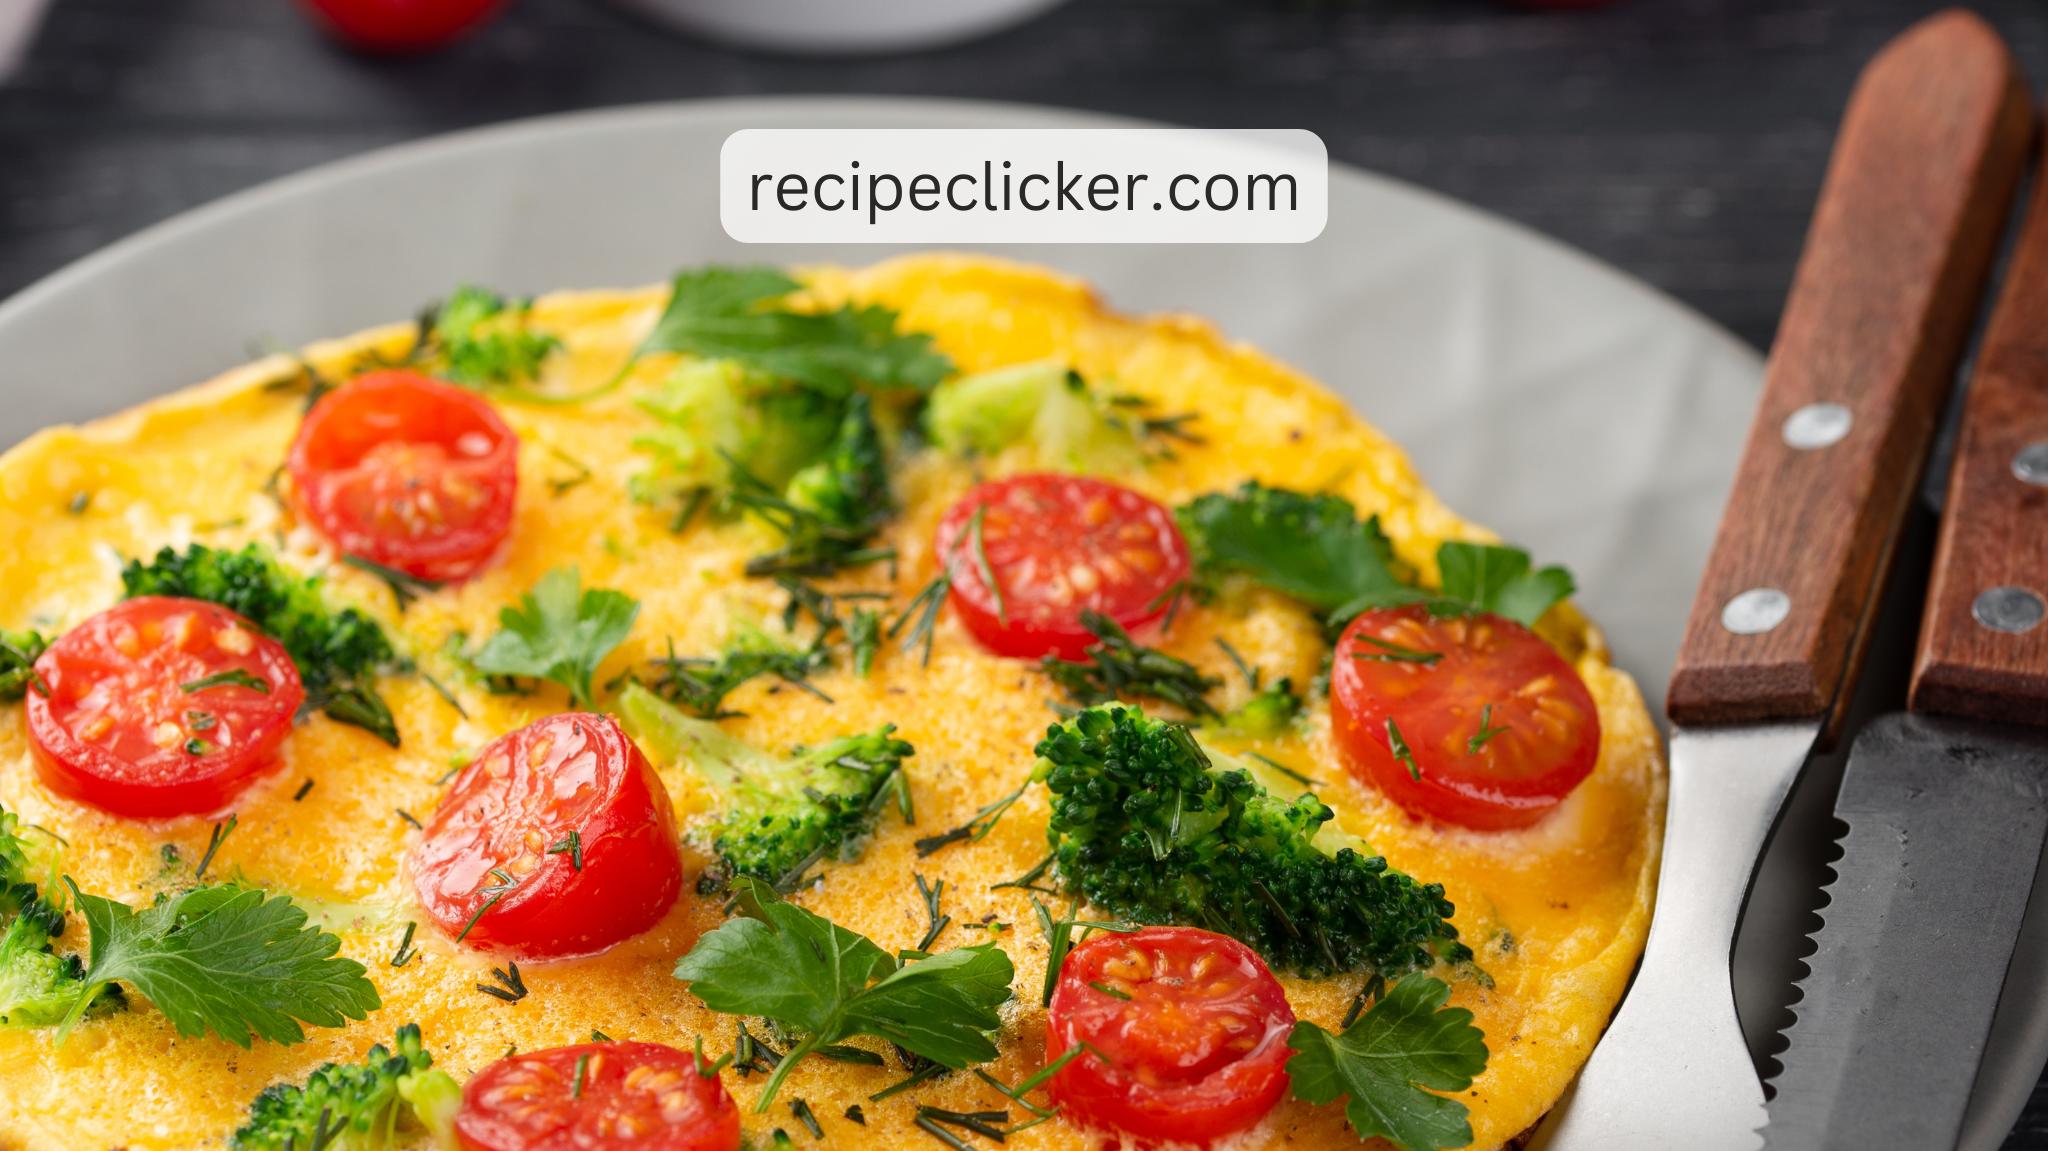 How to Make-Vegetable Omelets Recipe